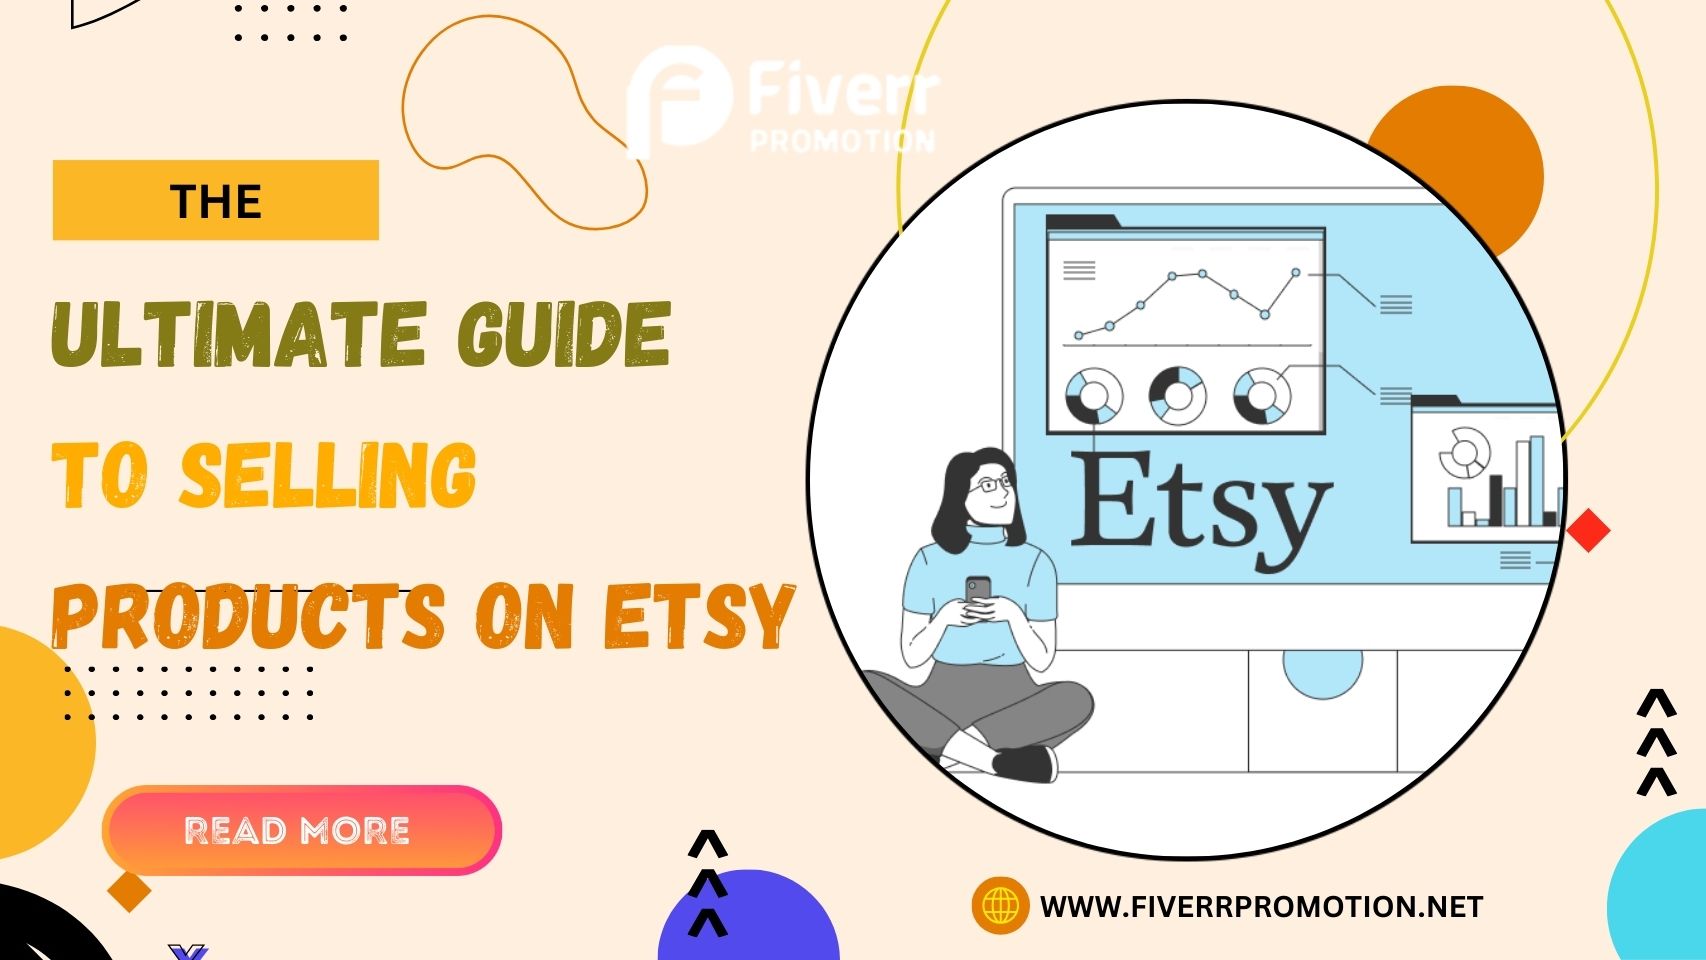 The Ultimate Guide to Selling Products on Etsy